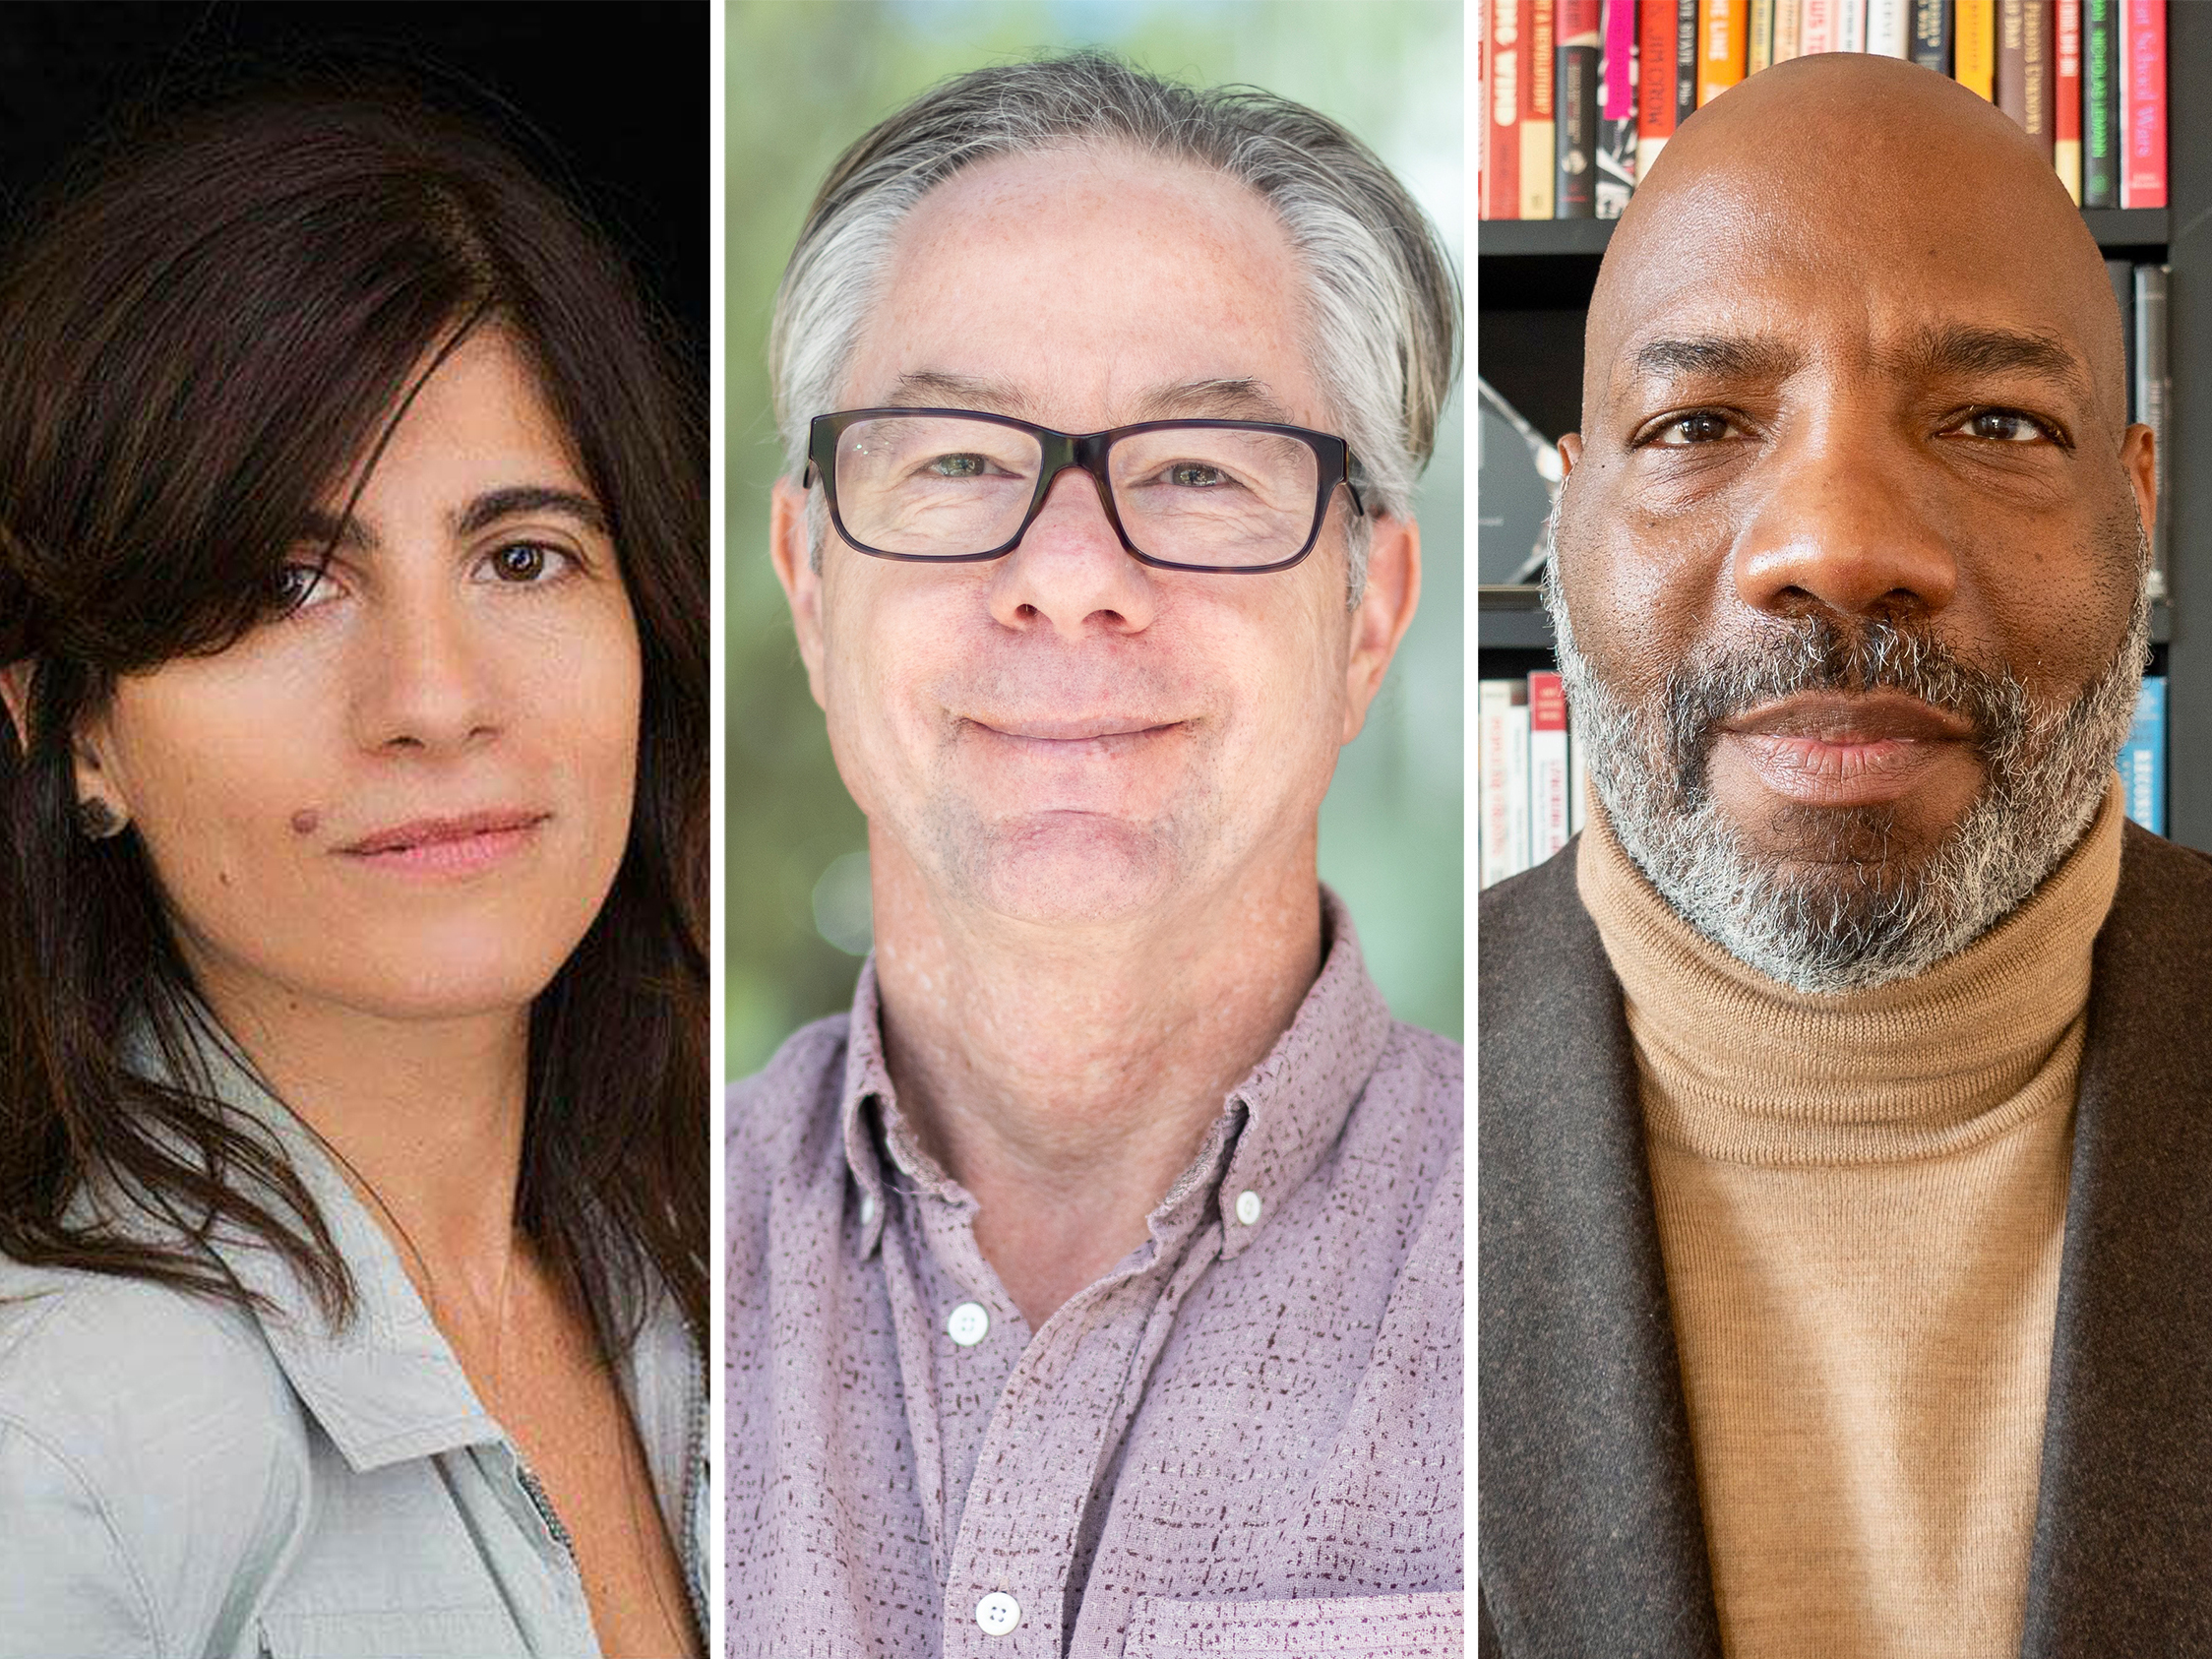 Is journalism disappearing? These top educators have a lot to say about that